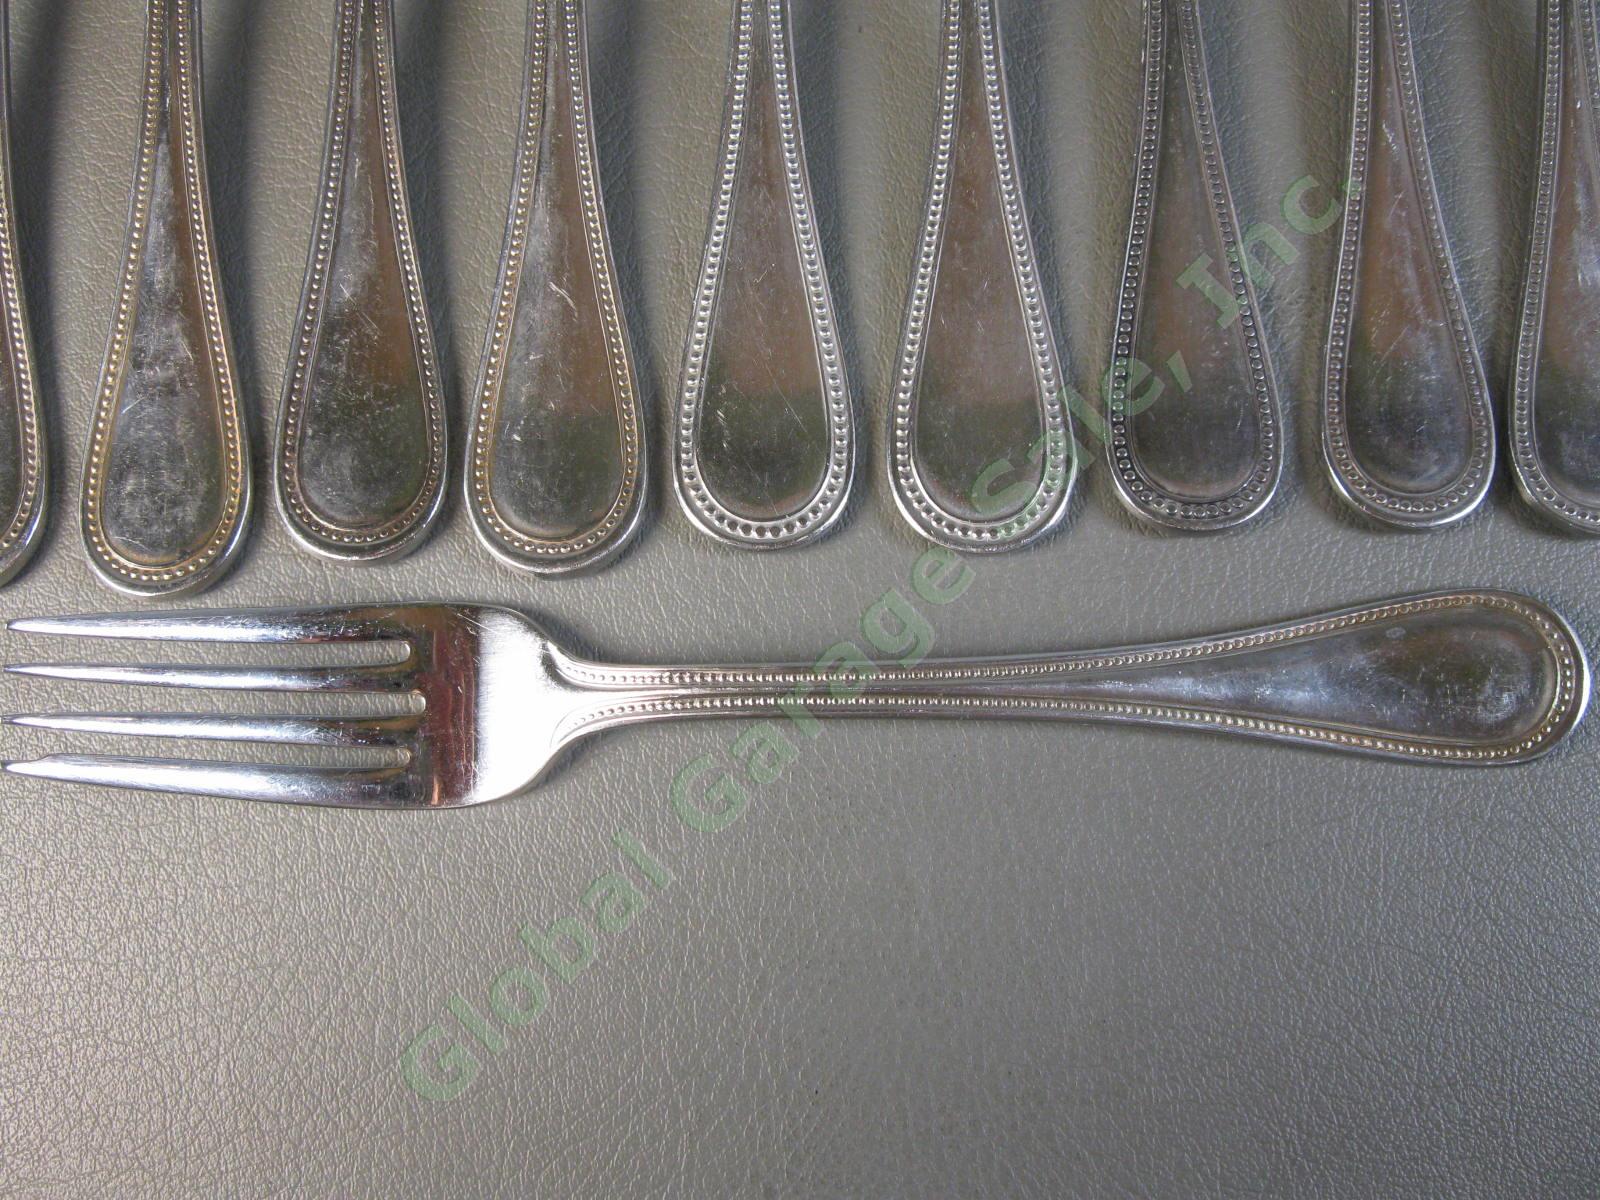 12 Towle Silver Beaded Antique Satin 7 1/4" Stainless Steel Salad Fork Set NR 3